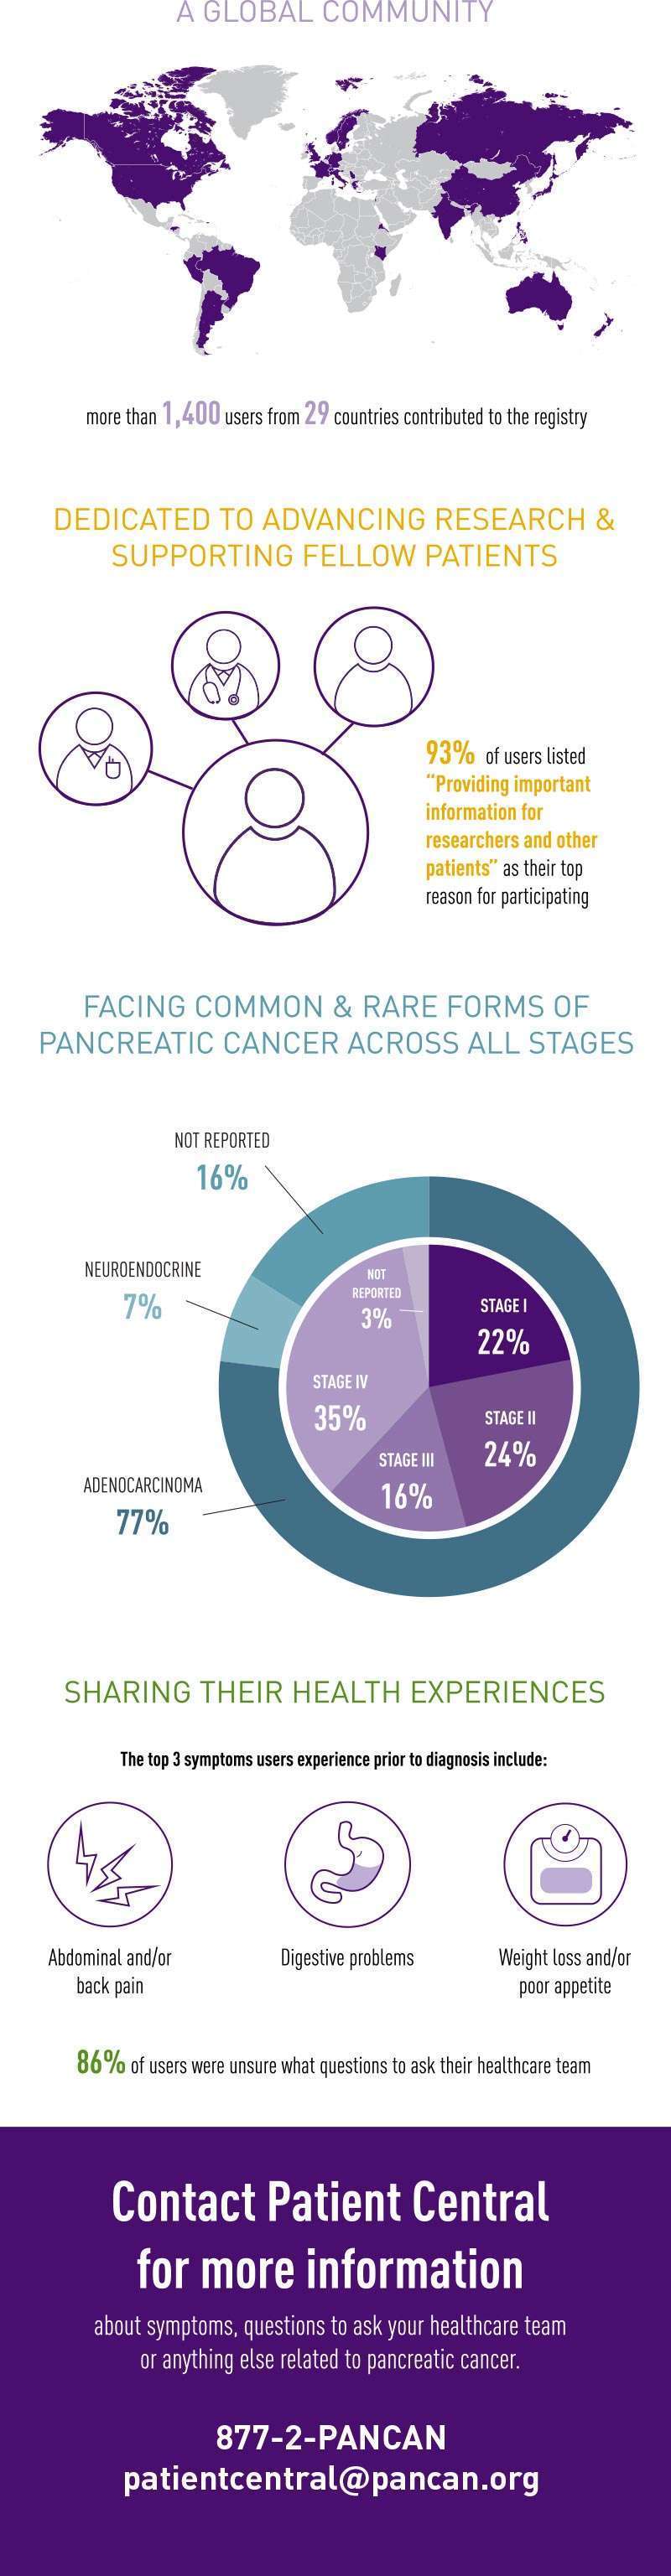 Infographic of pancreatic cancer patient data insights from PanCAN’s Patient Registry